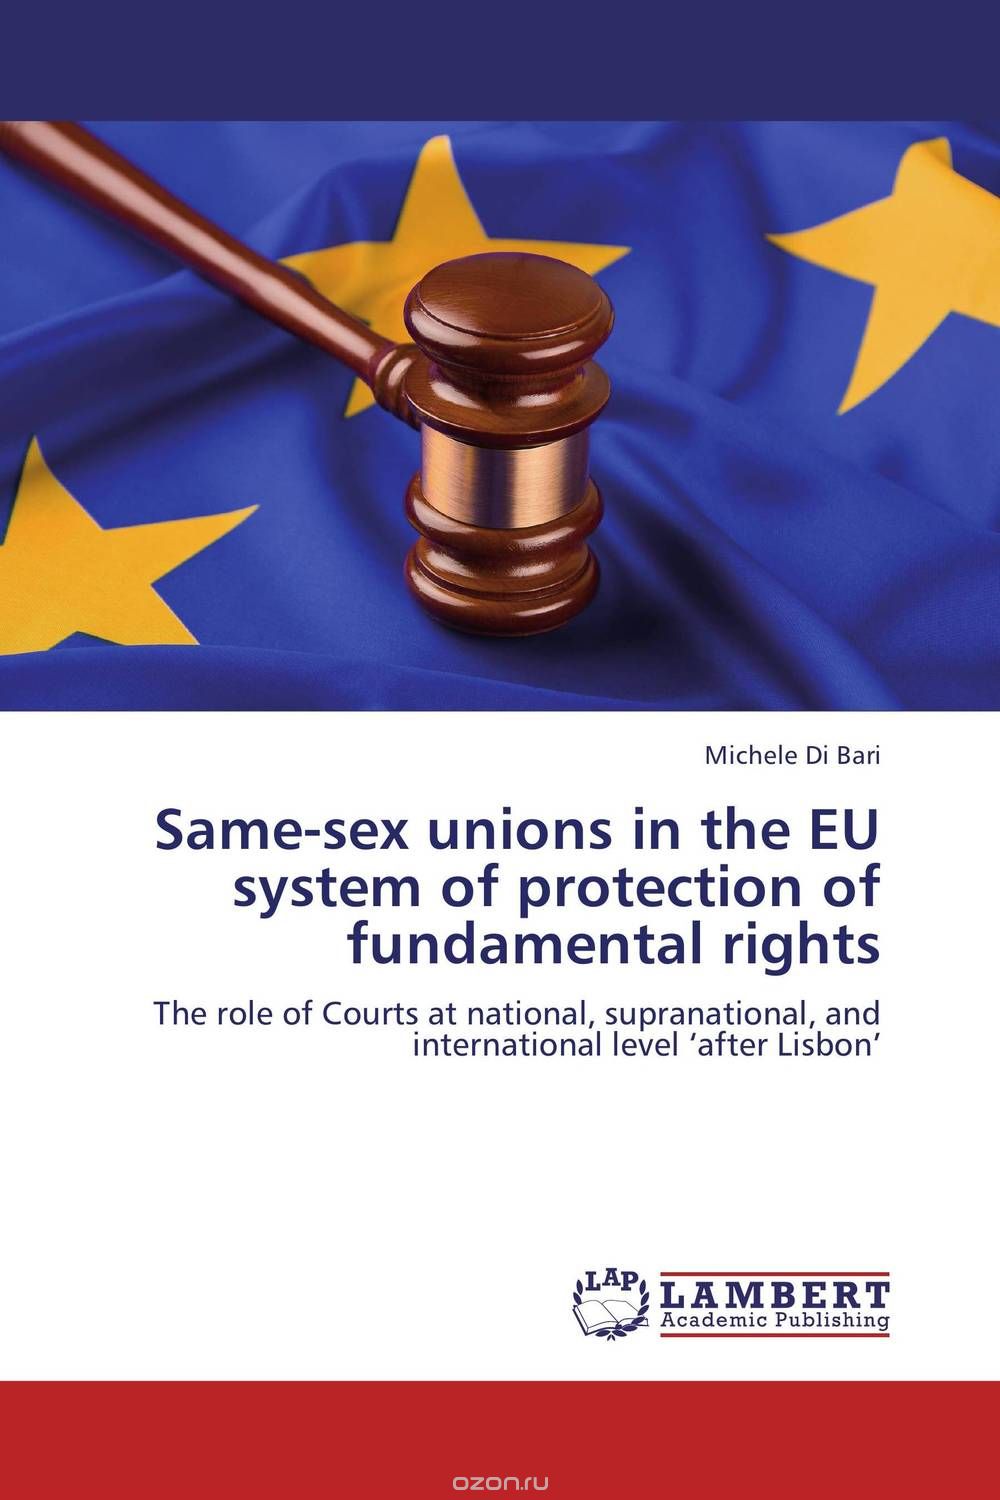 Скачать книгу "Same-sex unions in the EU system of protection of fundamental rights"